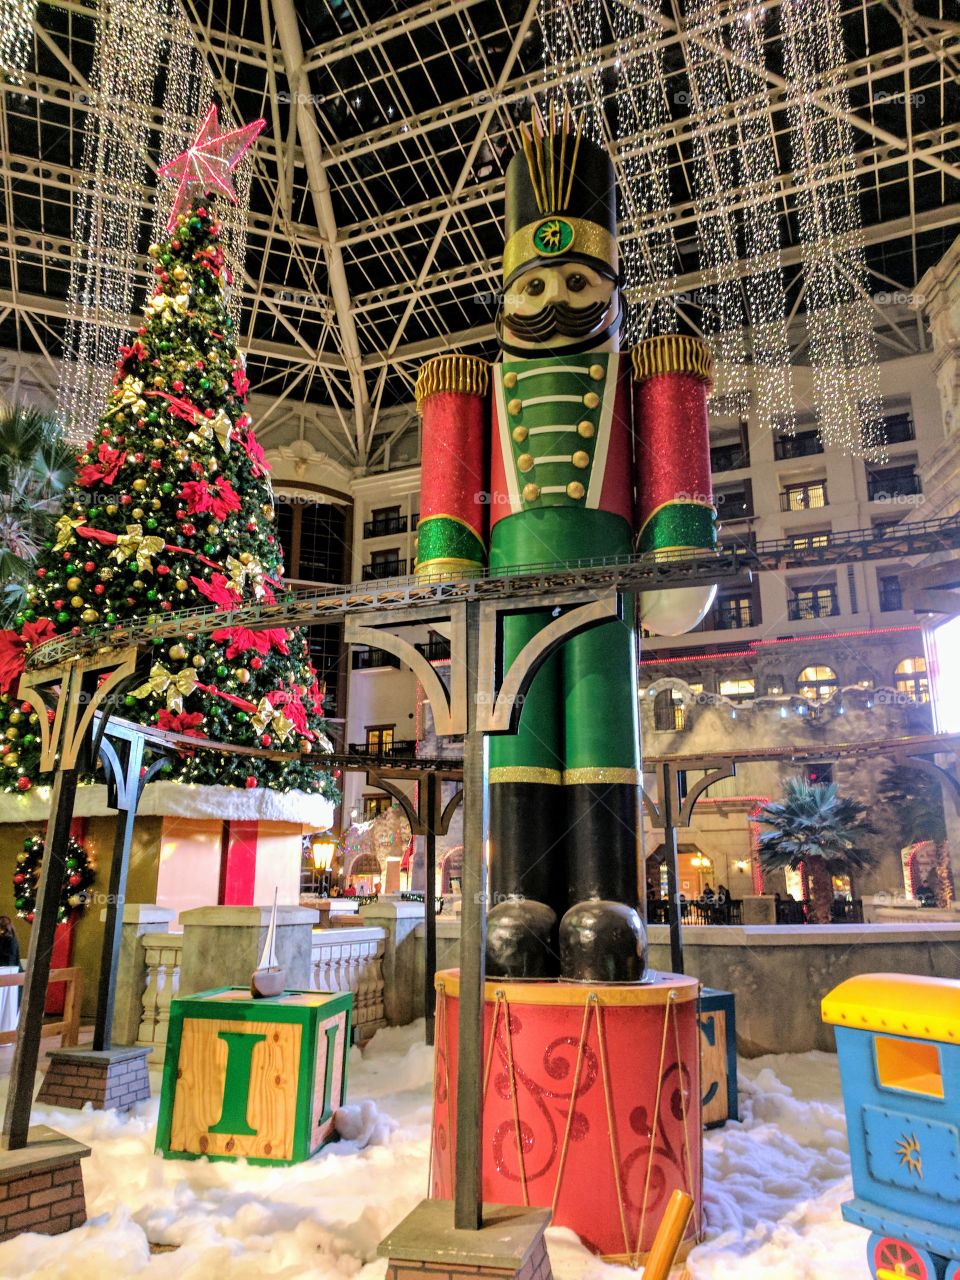 A larger than life nutcracker stands near a decorated Christmas tree